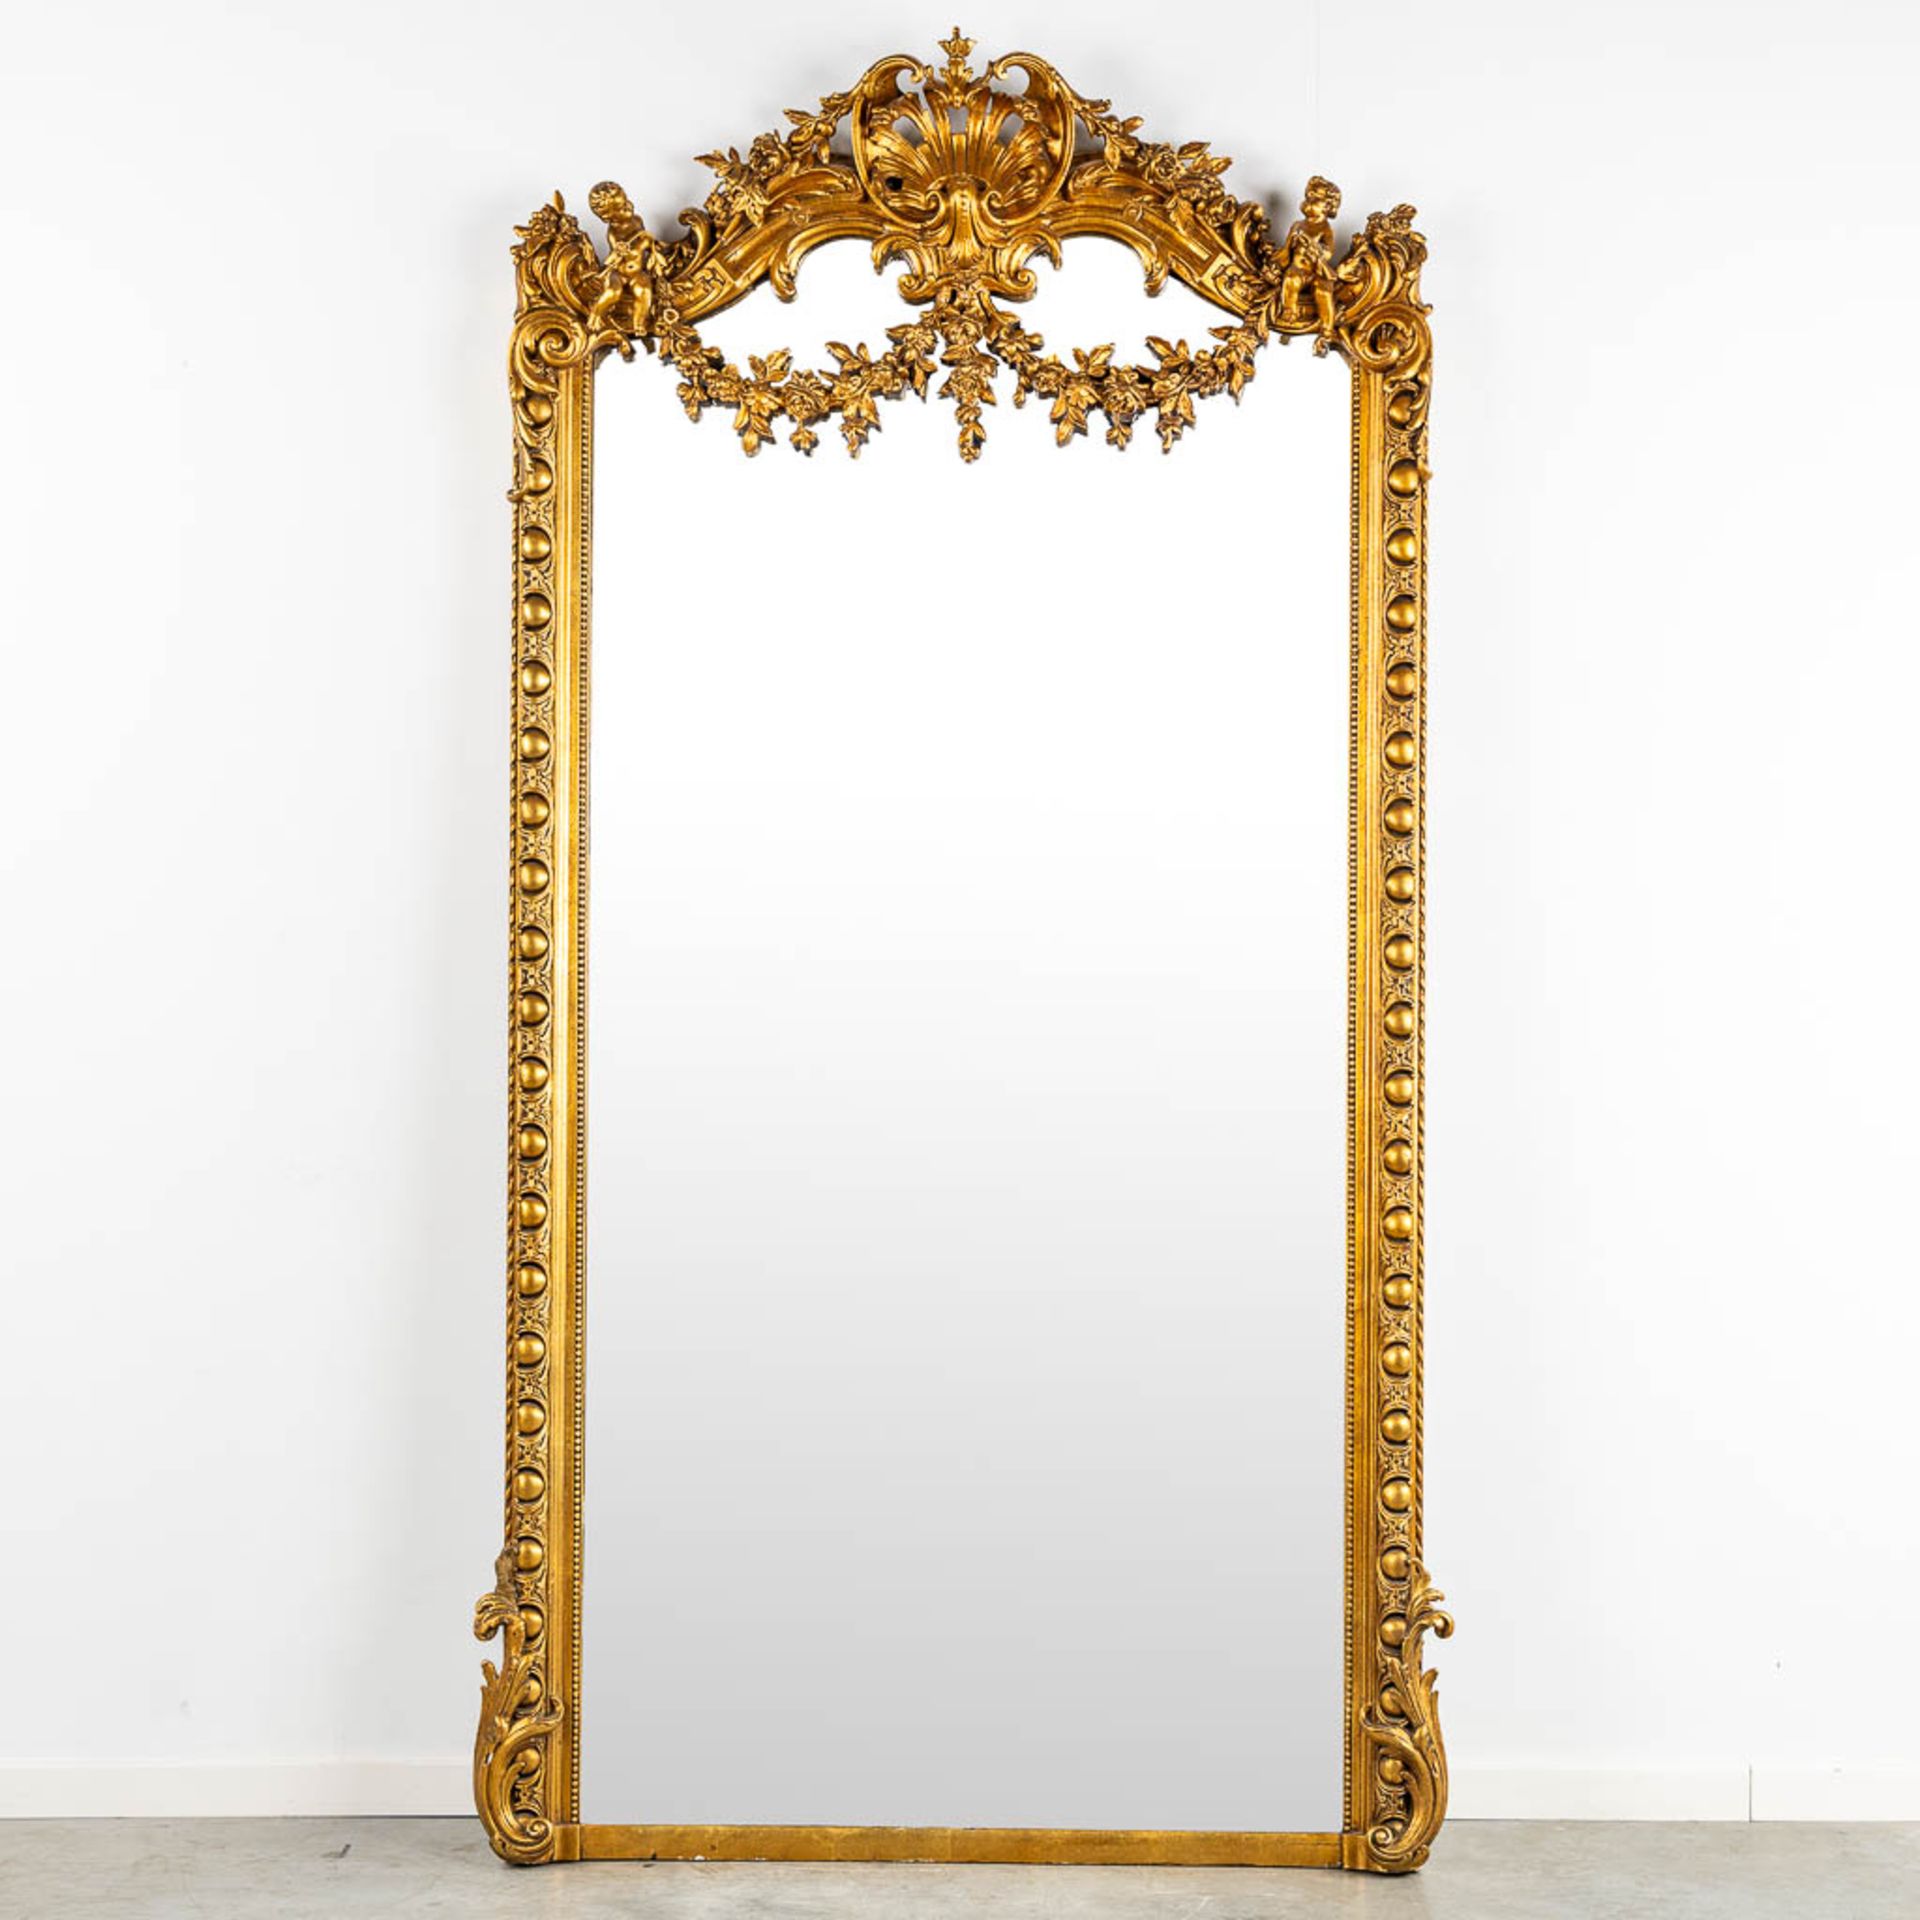 A mirror, sculptured wood, and stucco in a Louis XV style. 20th C. (W:110 x H:218 cm)